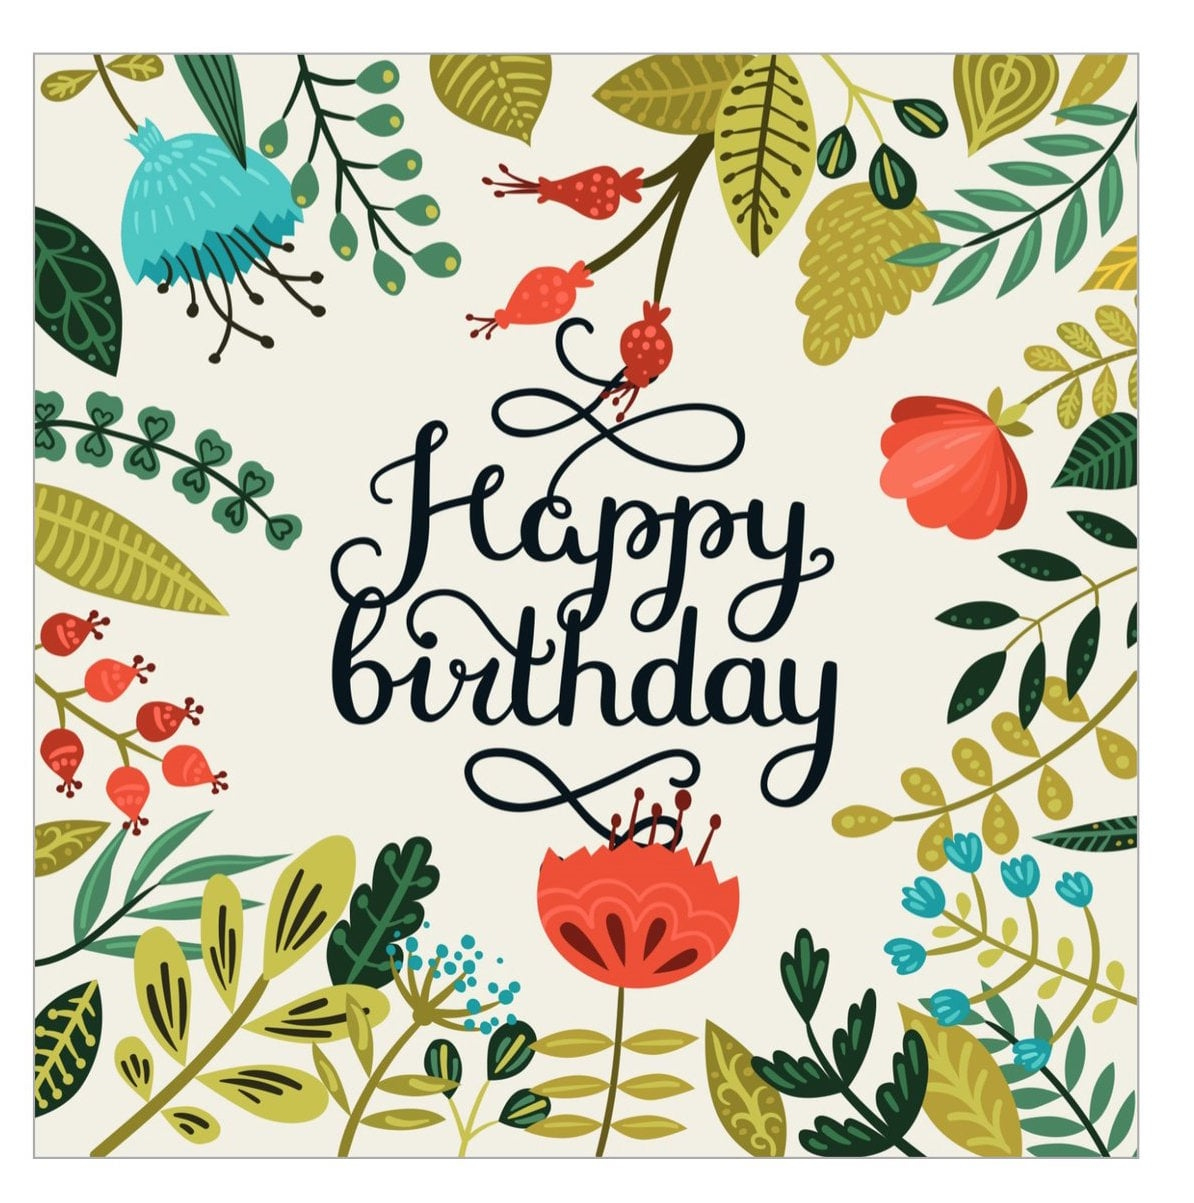 Free Printable Cards For Birthdays | Popsugar Smart Living throughout Free Printable Bday Cards